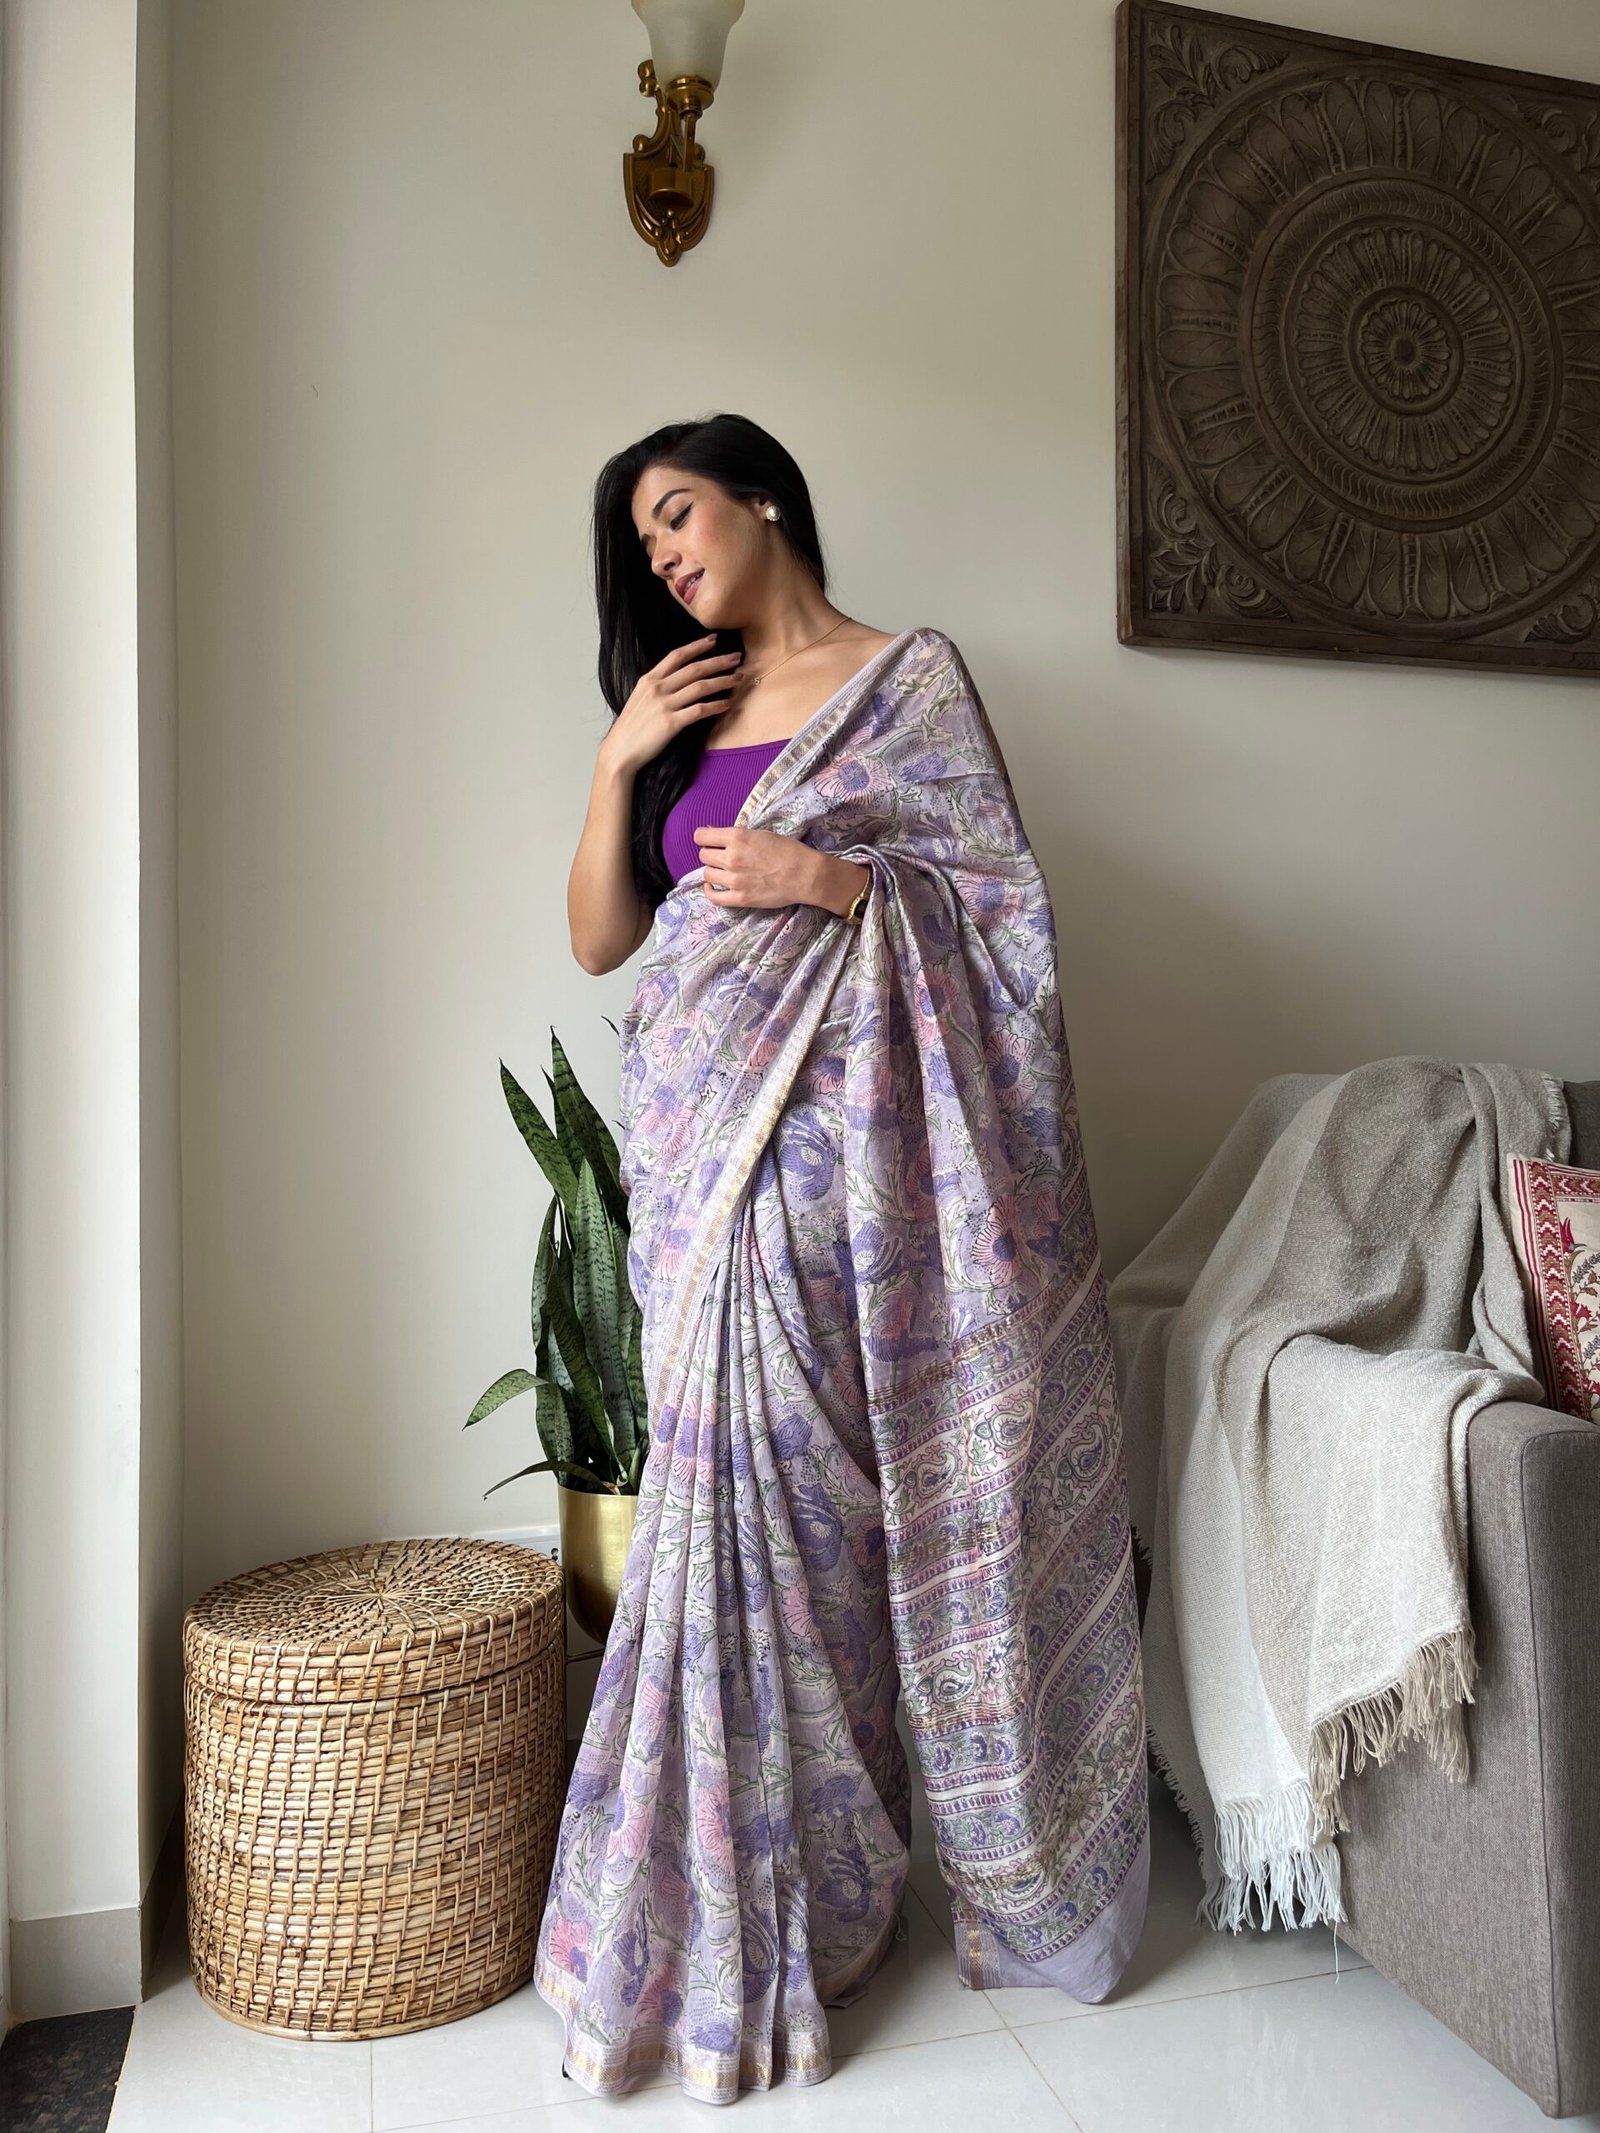 Hema jani online shop - are sarees in fashion are sarees religious can saree  be worn without petticoat can sarees be washed in washing machine where did  saree originated why did the